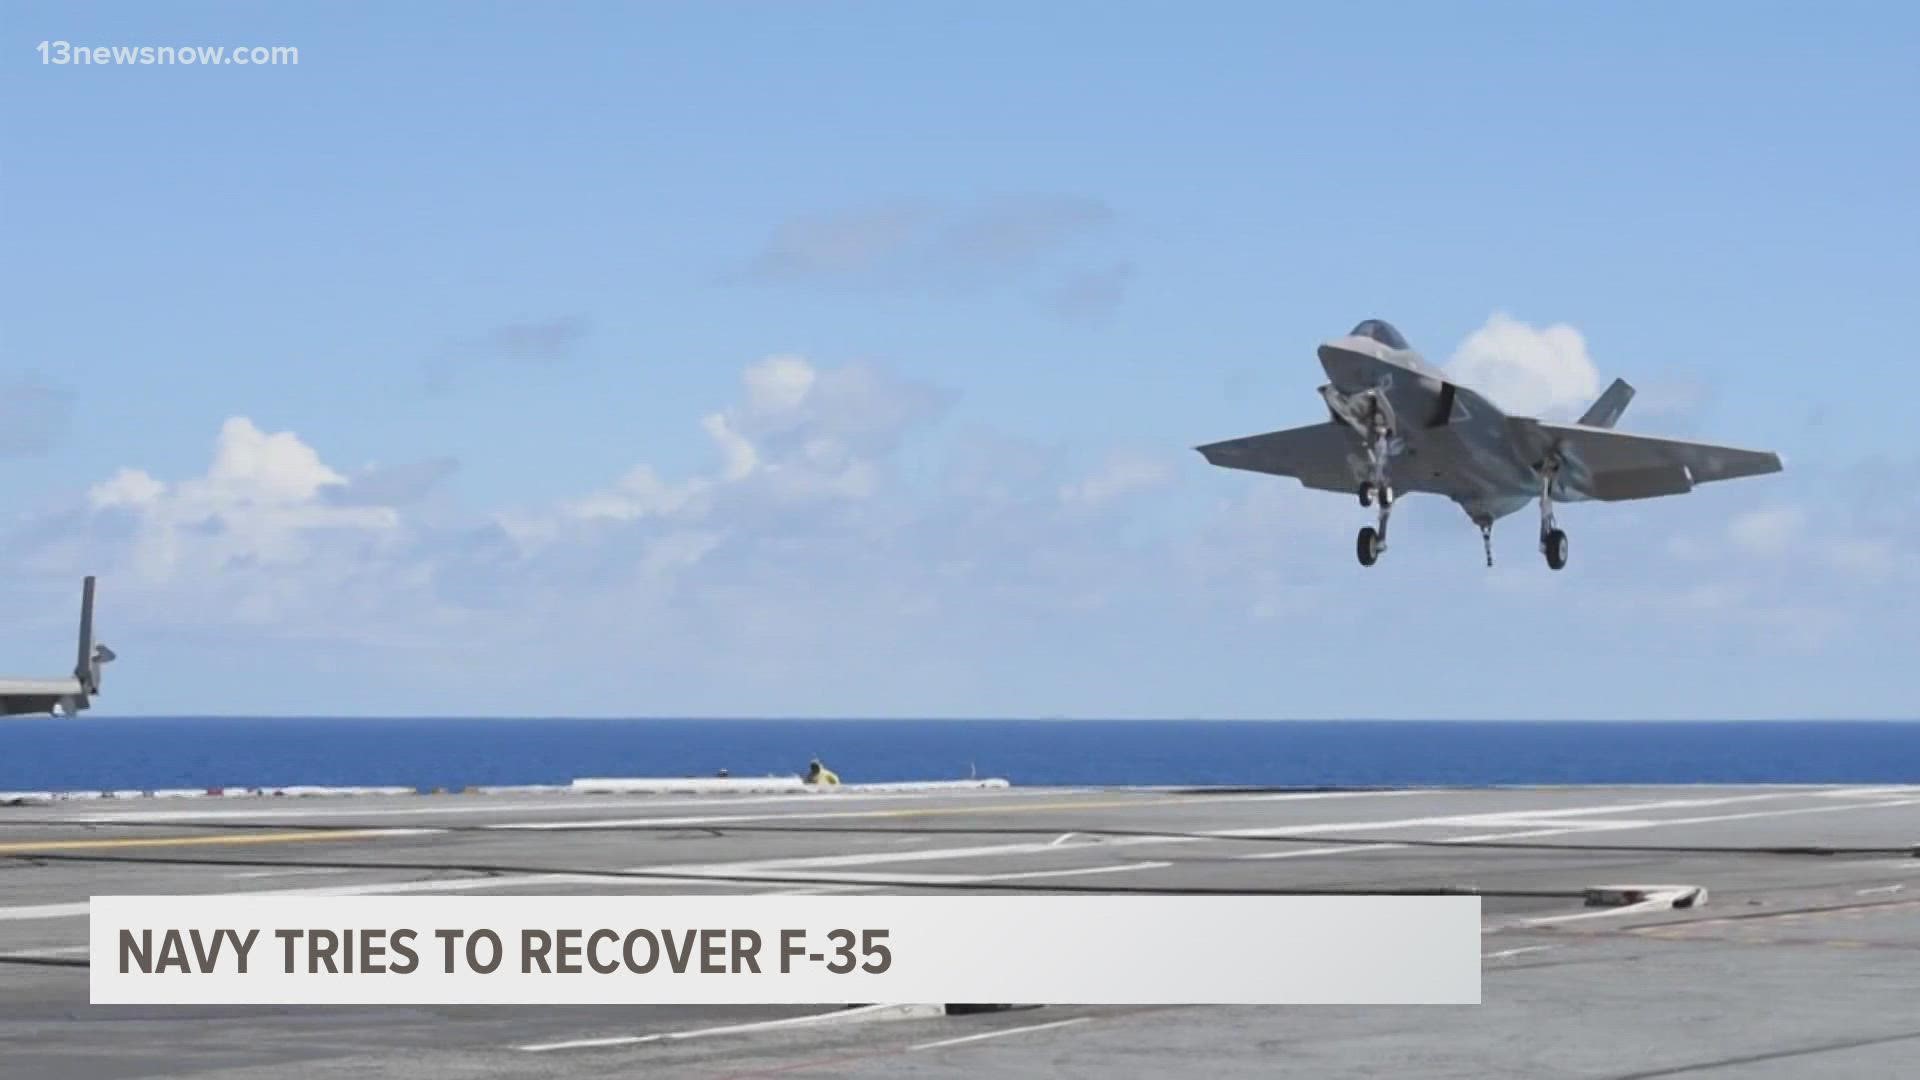 The Navy has started making plans to recover the F-35-C fighter jet that crashed on Monday.